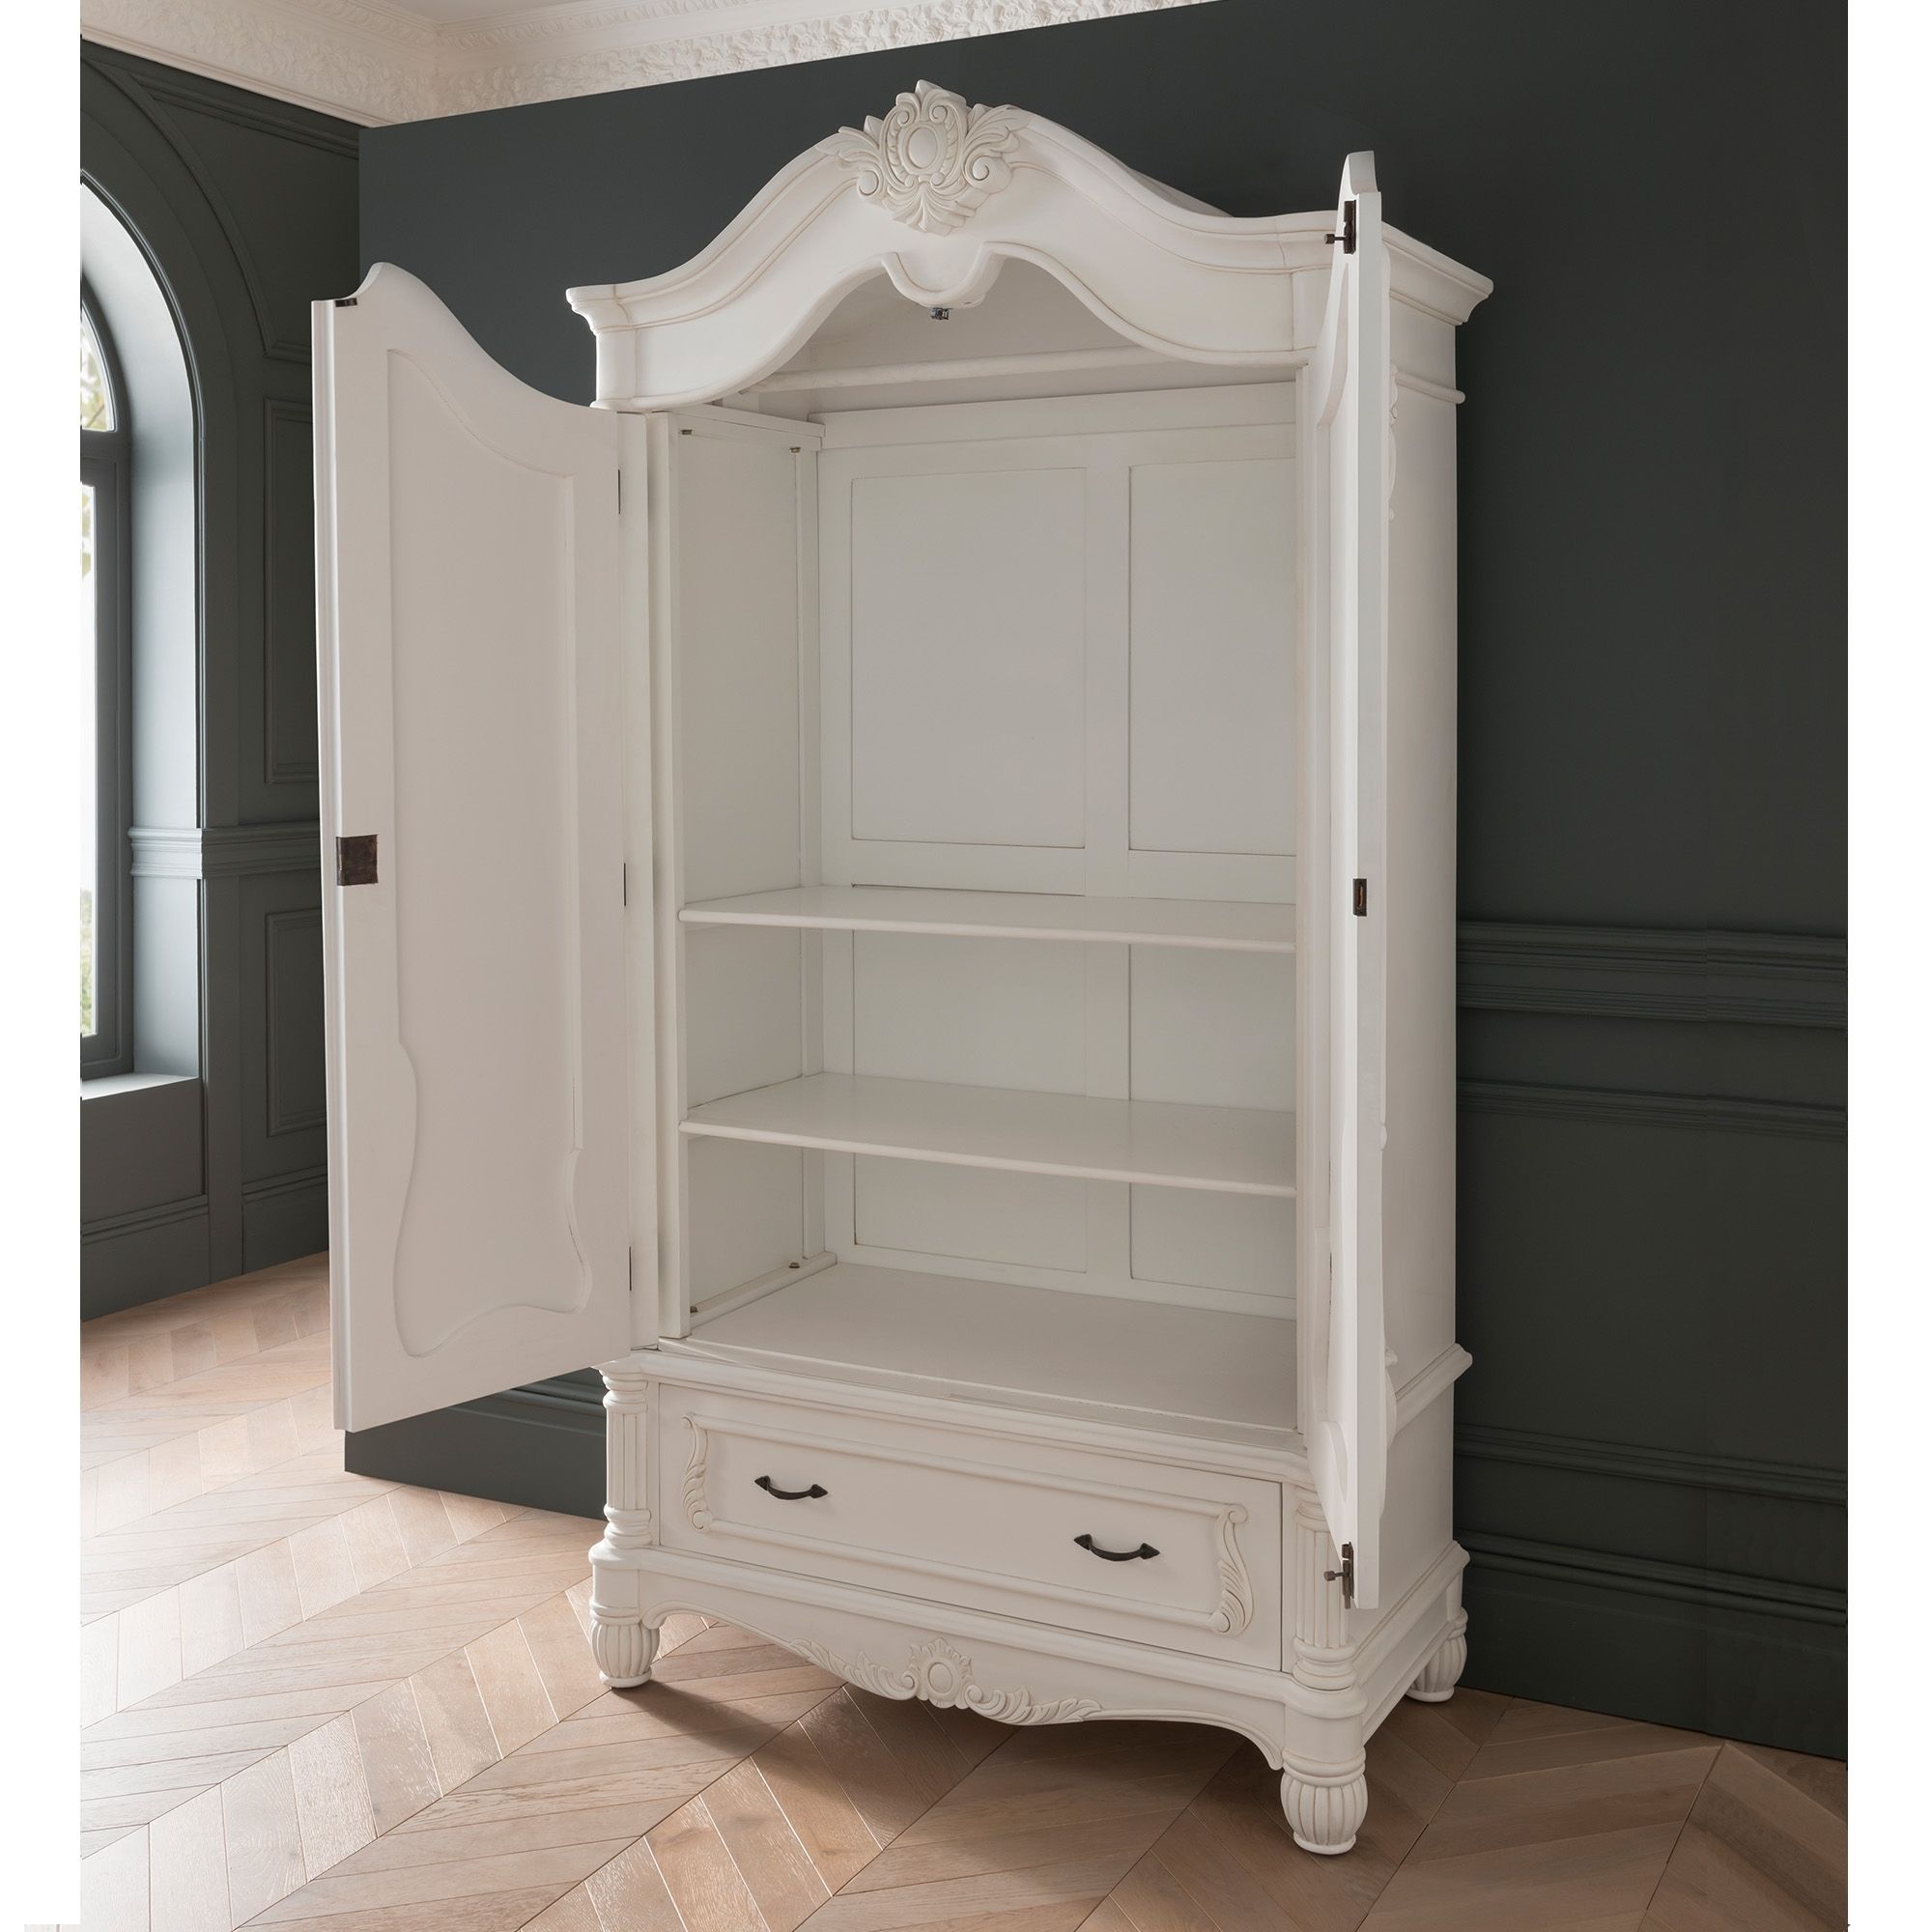 Antique French Style White Finished 1 Drawer Wardrobe | Homesdirect365 Within White Shabby Chic Wardrobes (View 5 of 15)